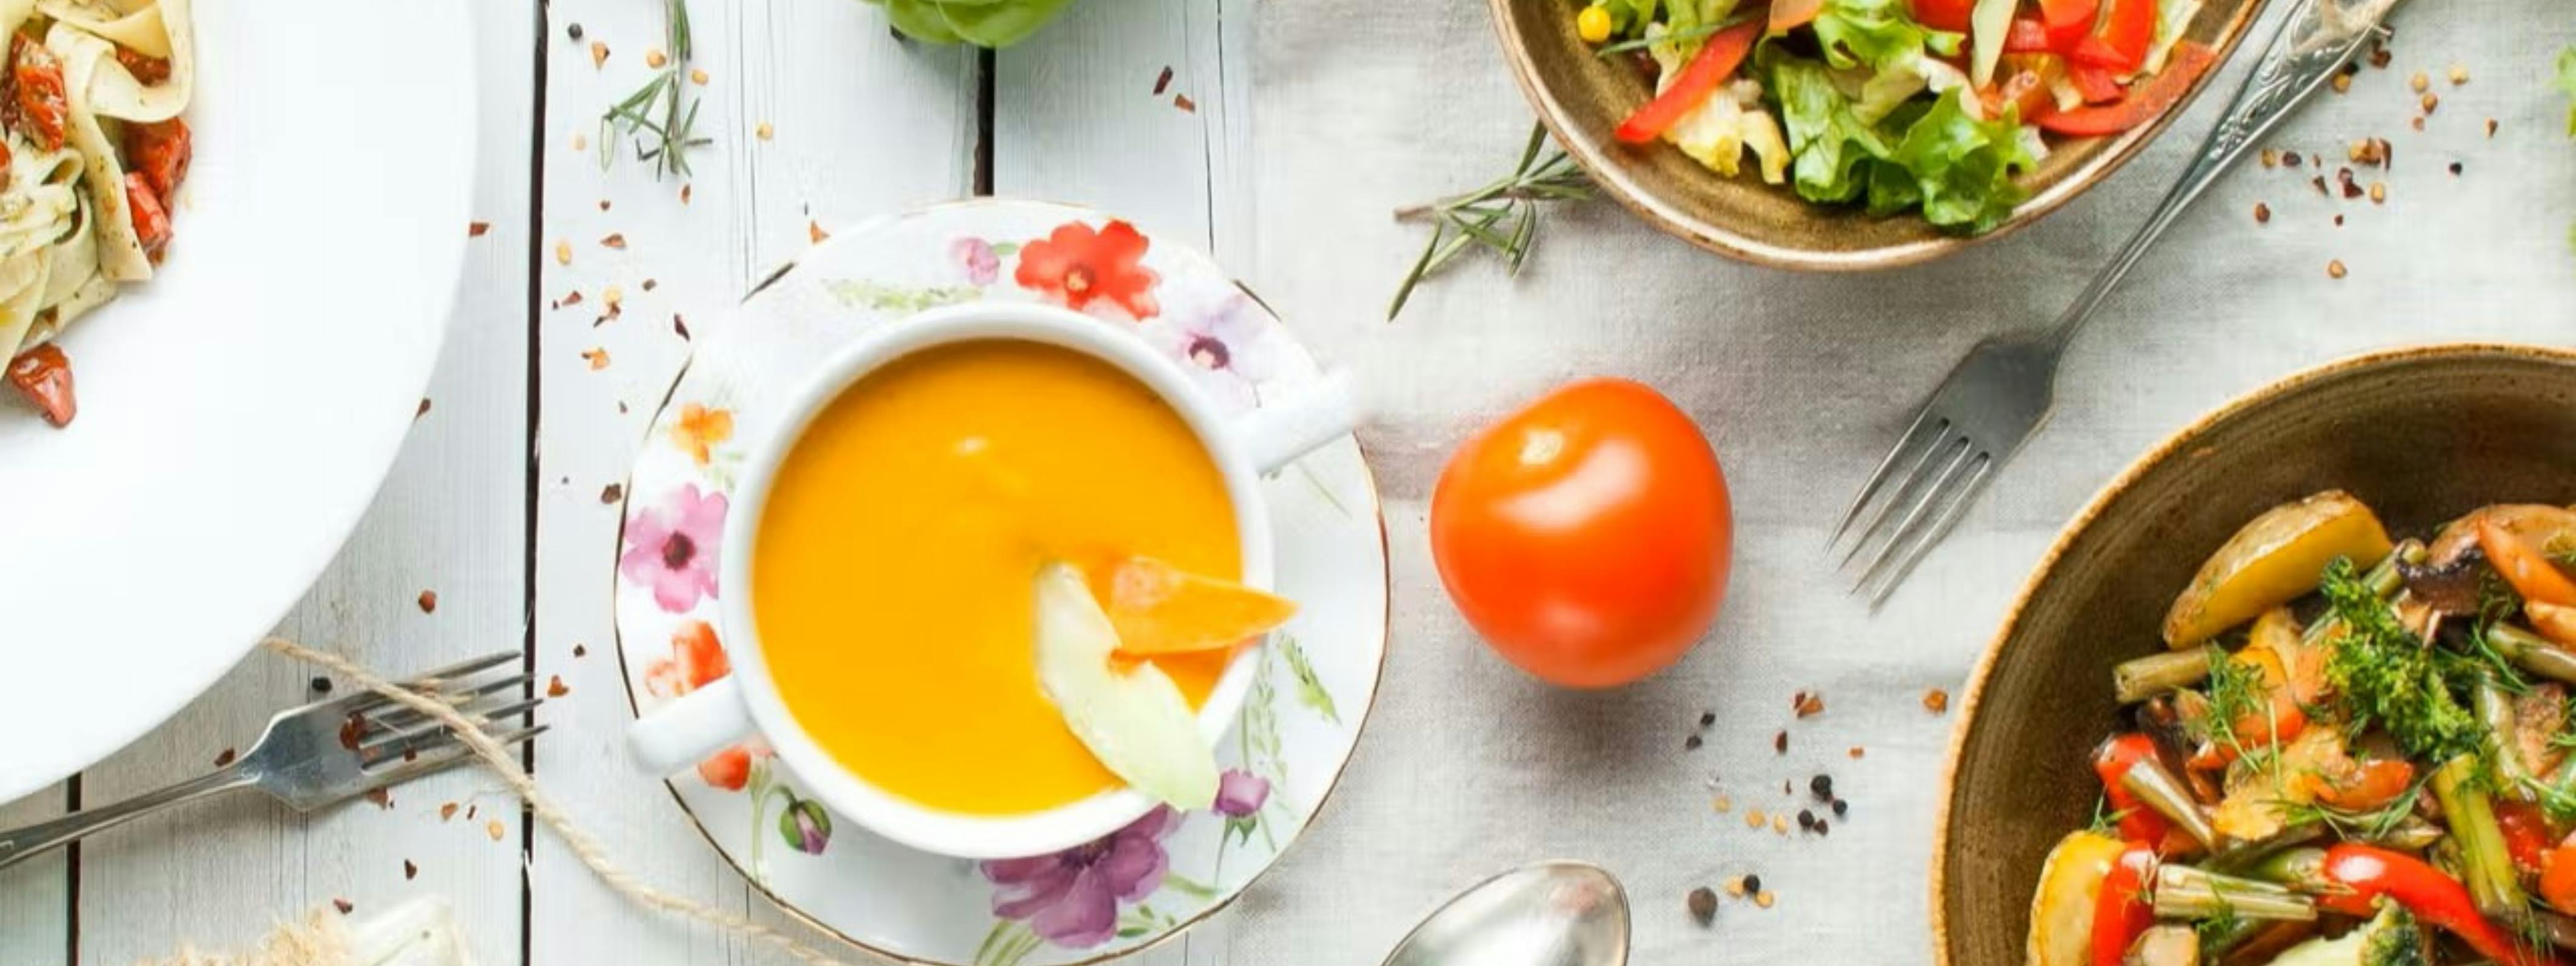 Orange soup, salads, silverware, a tomato and redpepper flakes